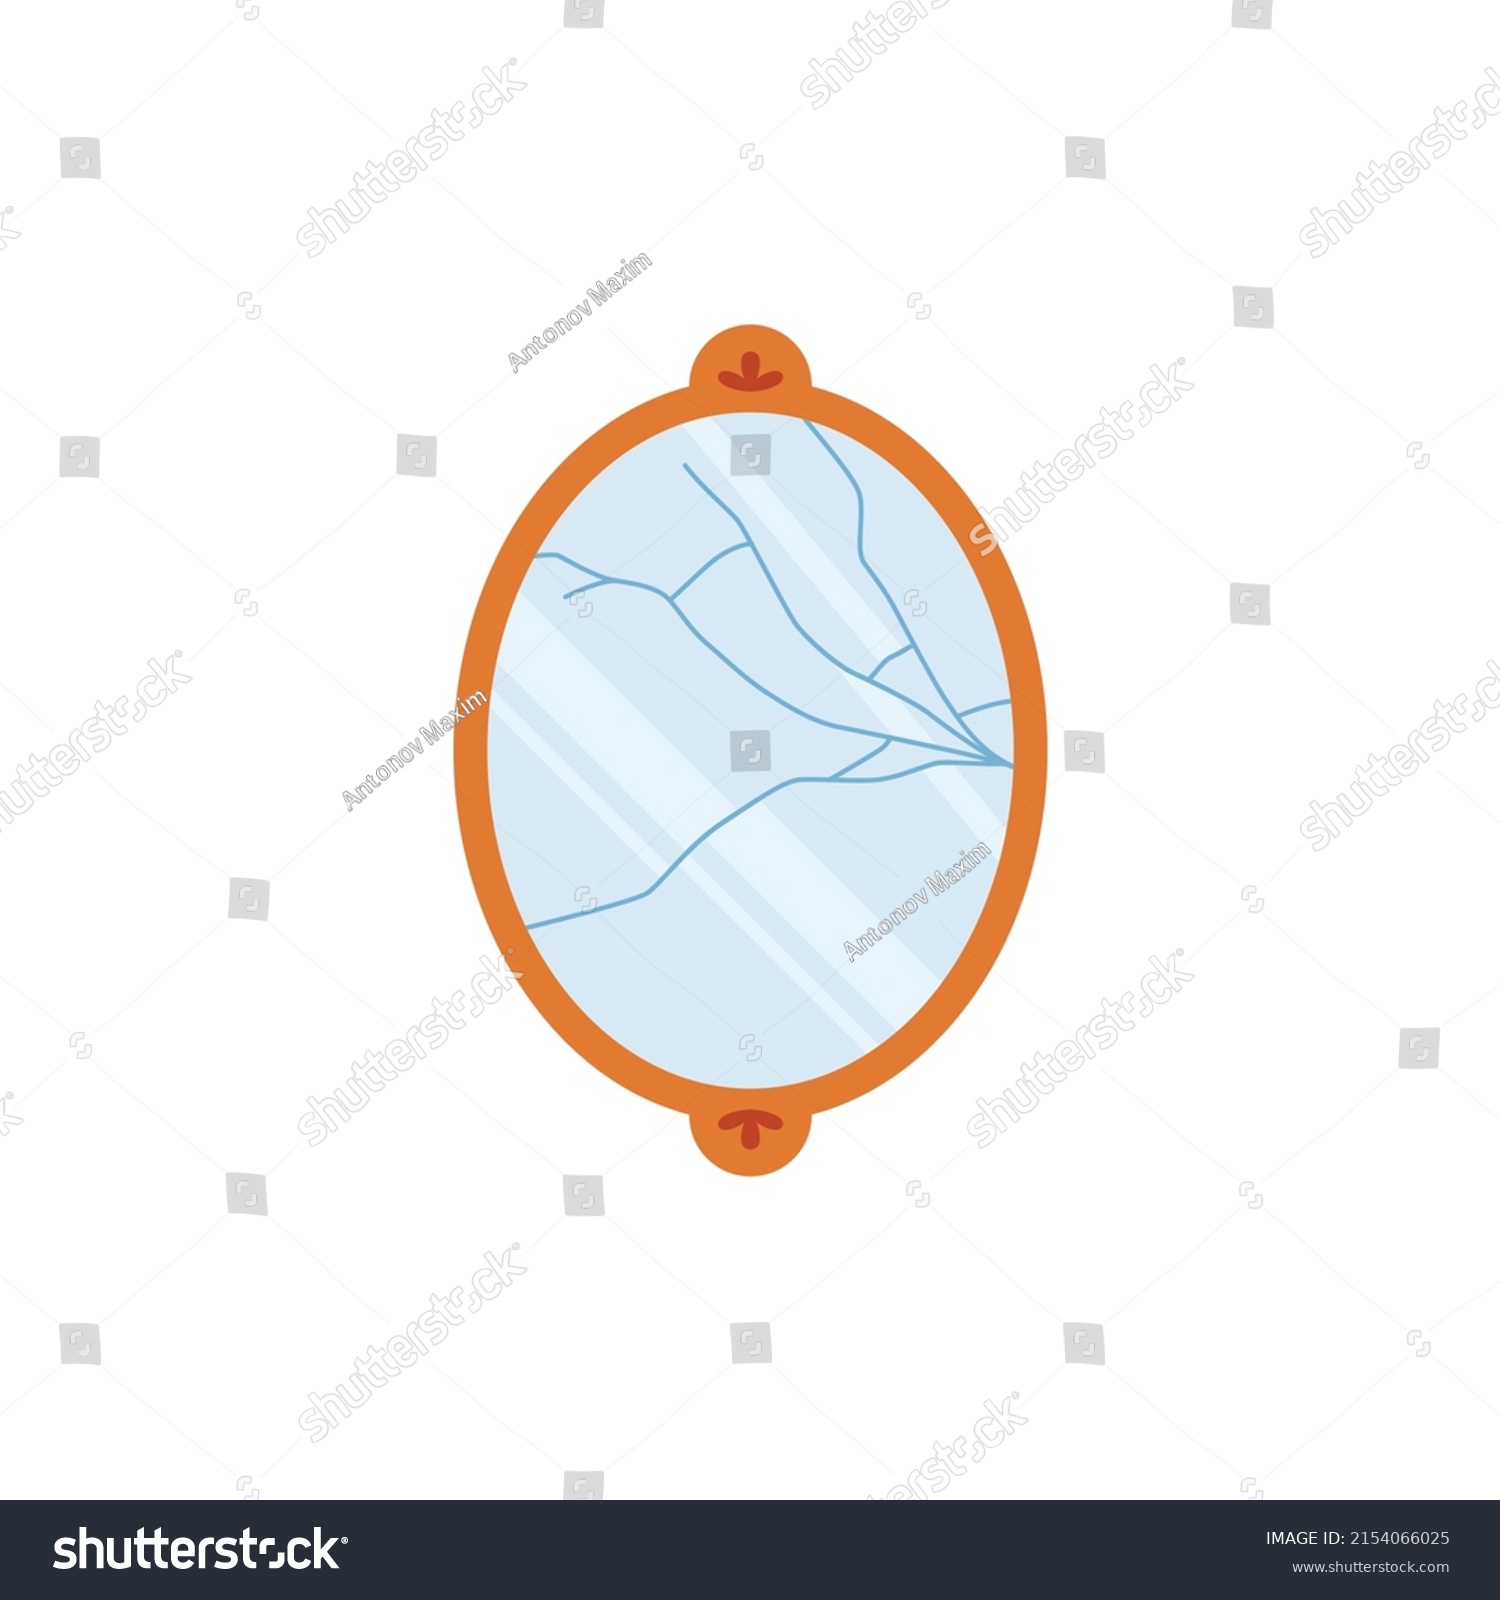 SVG of Broken mirror with cracked glass, flat vector illustration isolated on white background. Bad luck and misfortune symbol or omen, superstition concept. Oval shaped mirror for wall decoration. svg